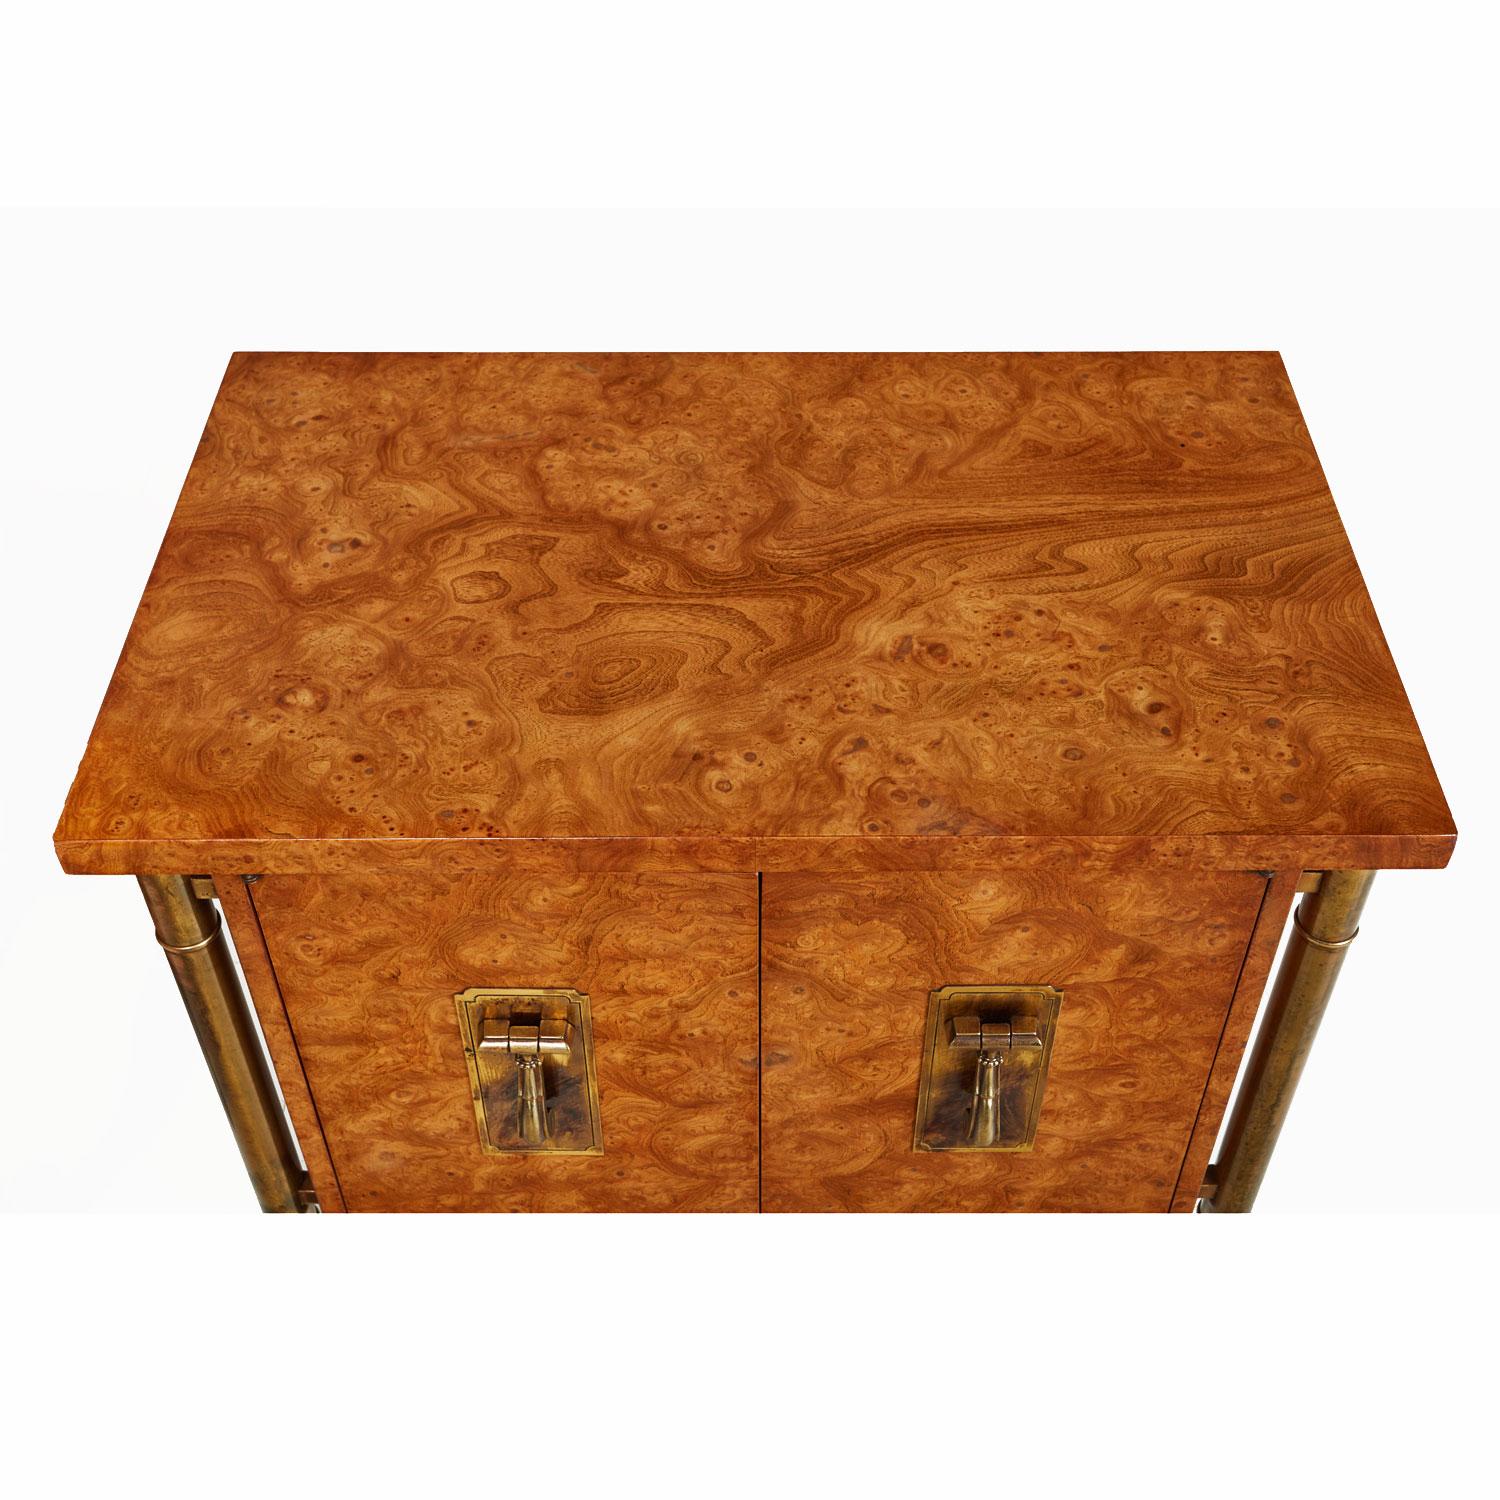 American Pair of Mastercraft Nightstand End Tables Hollywood Regency Burl Wood and Brass